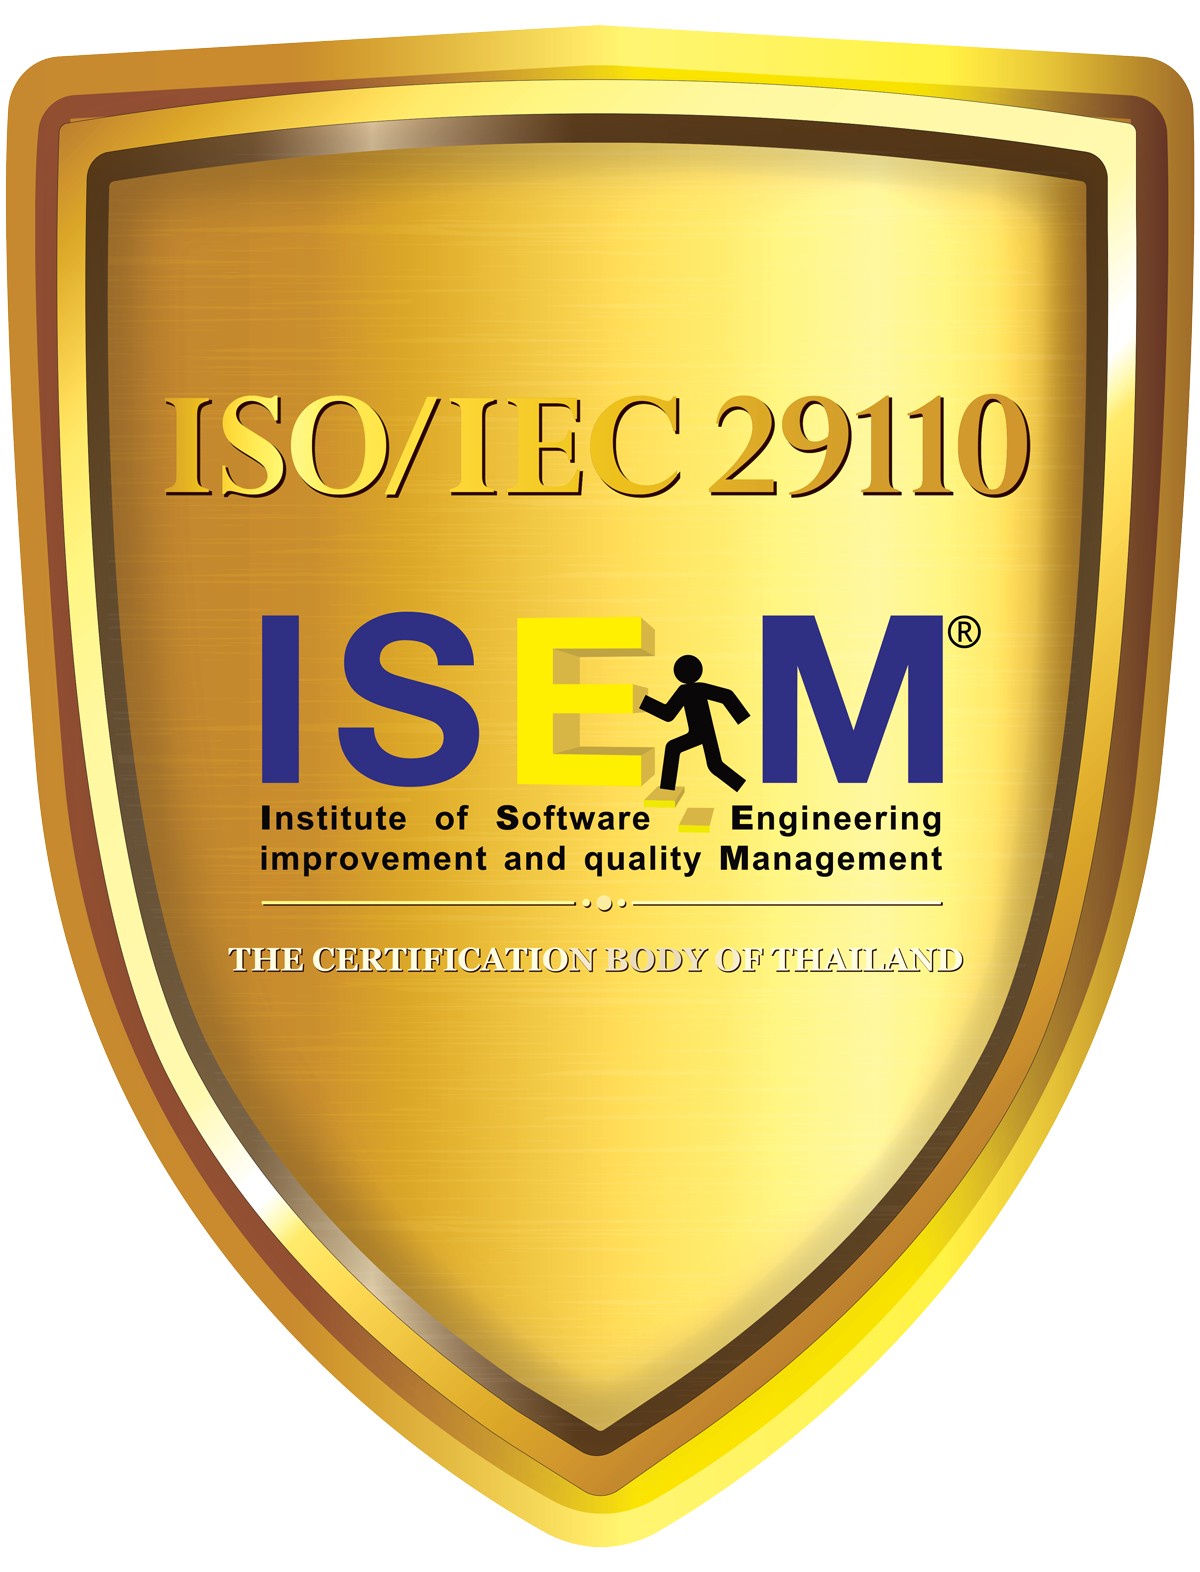 Netway Communication Accredited ISO/IEC 29110-0020, Reinforces Management and Software Engineering Process, Open Wings In Thai And International Markets.